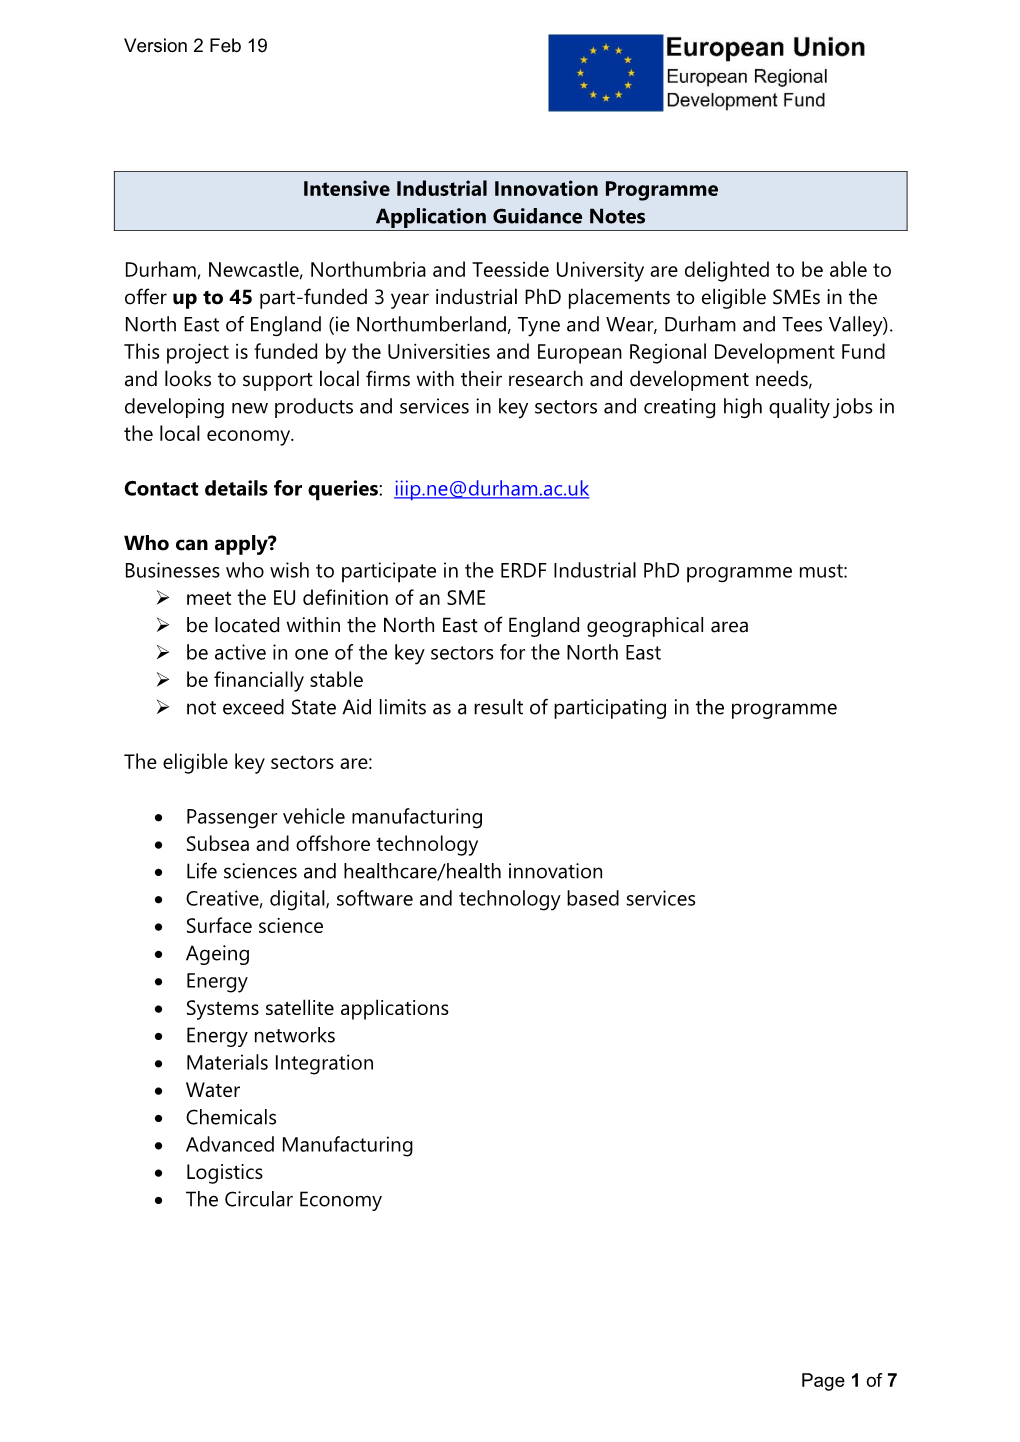 Intensive Industrial Innovation Programme Application Guidance Notes